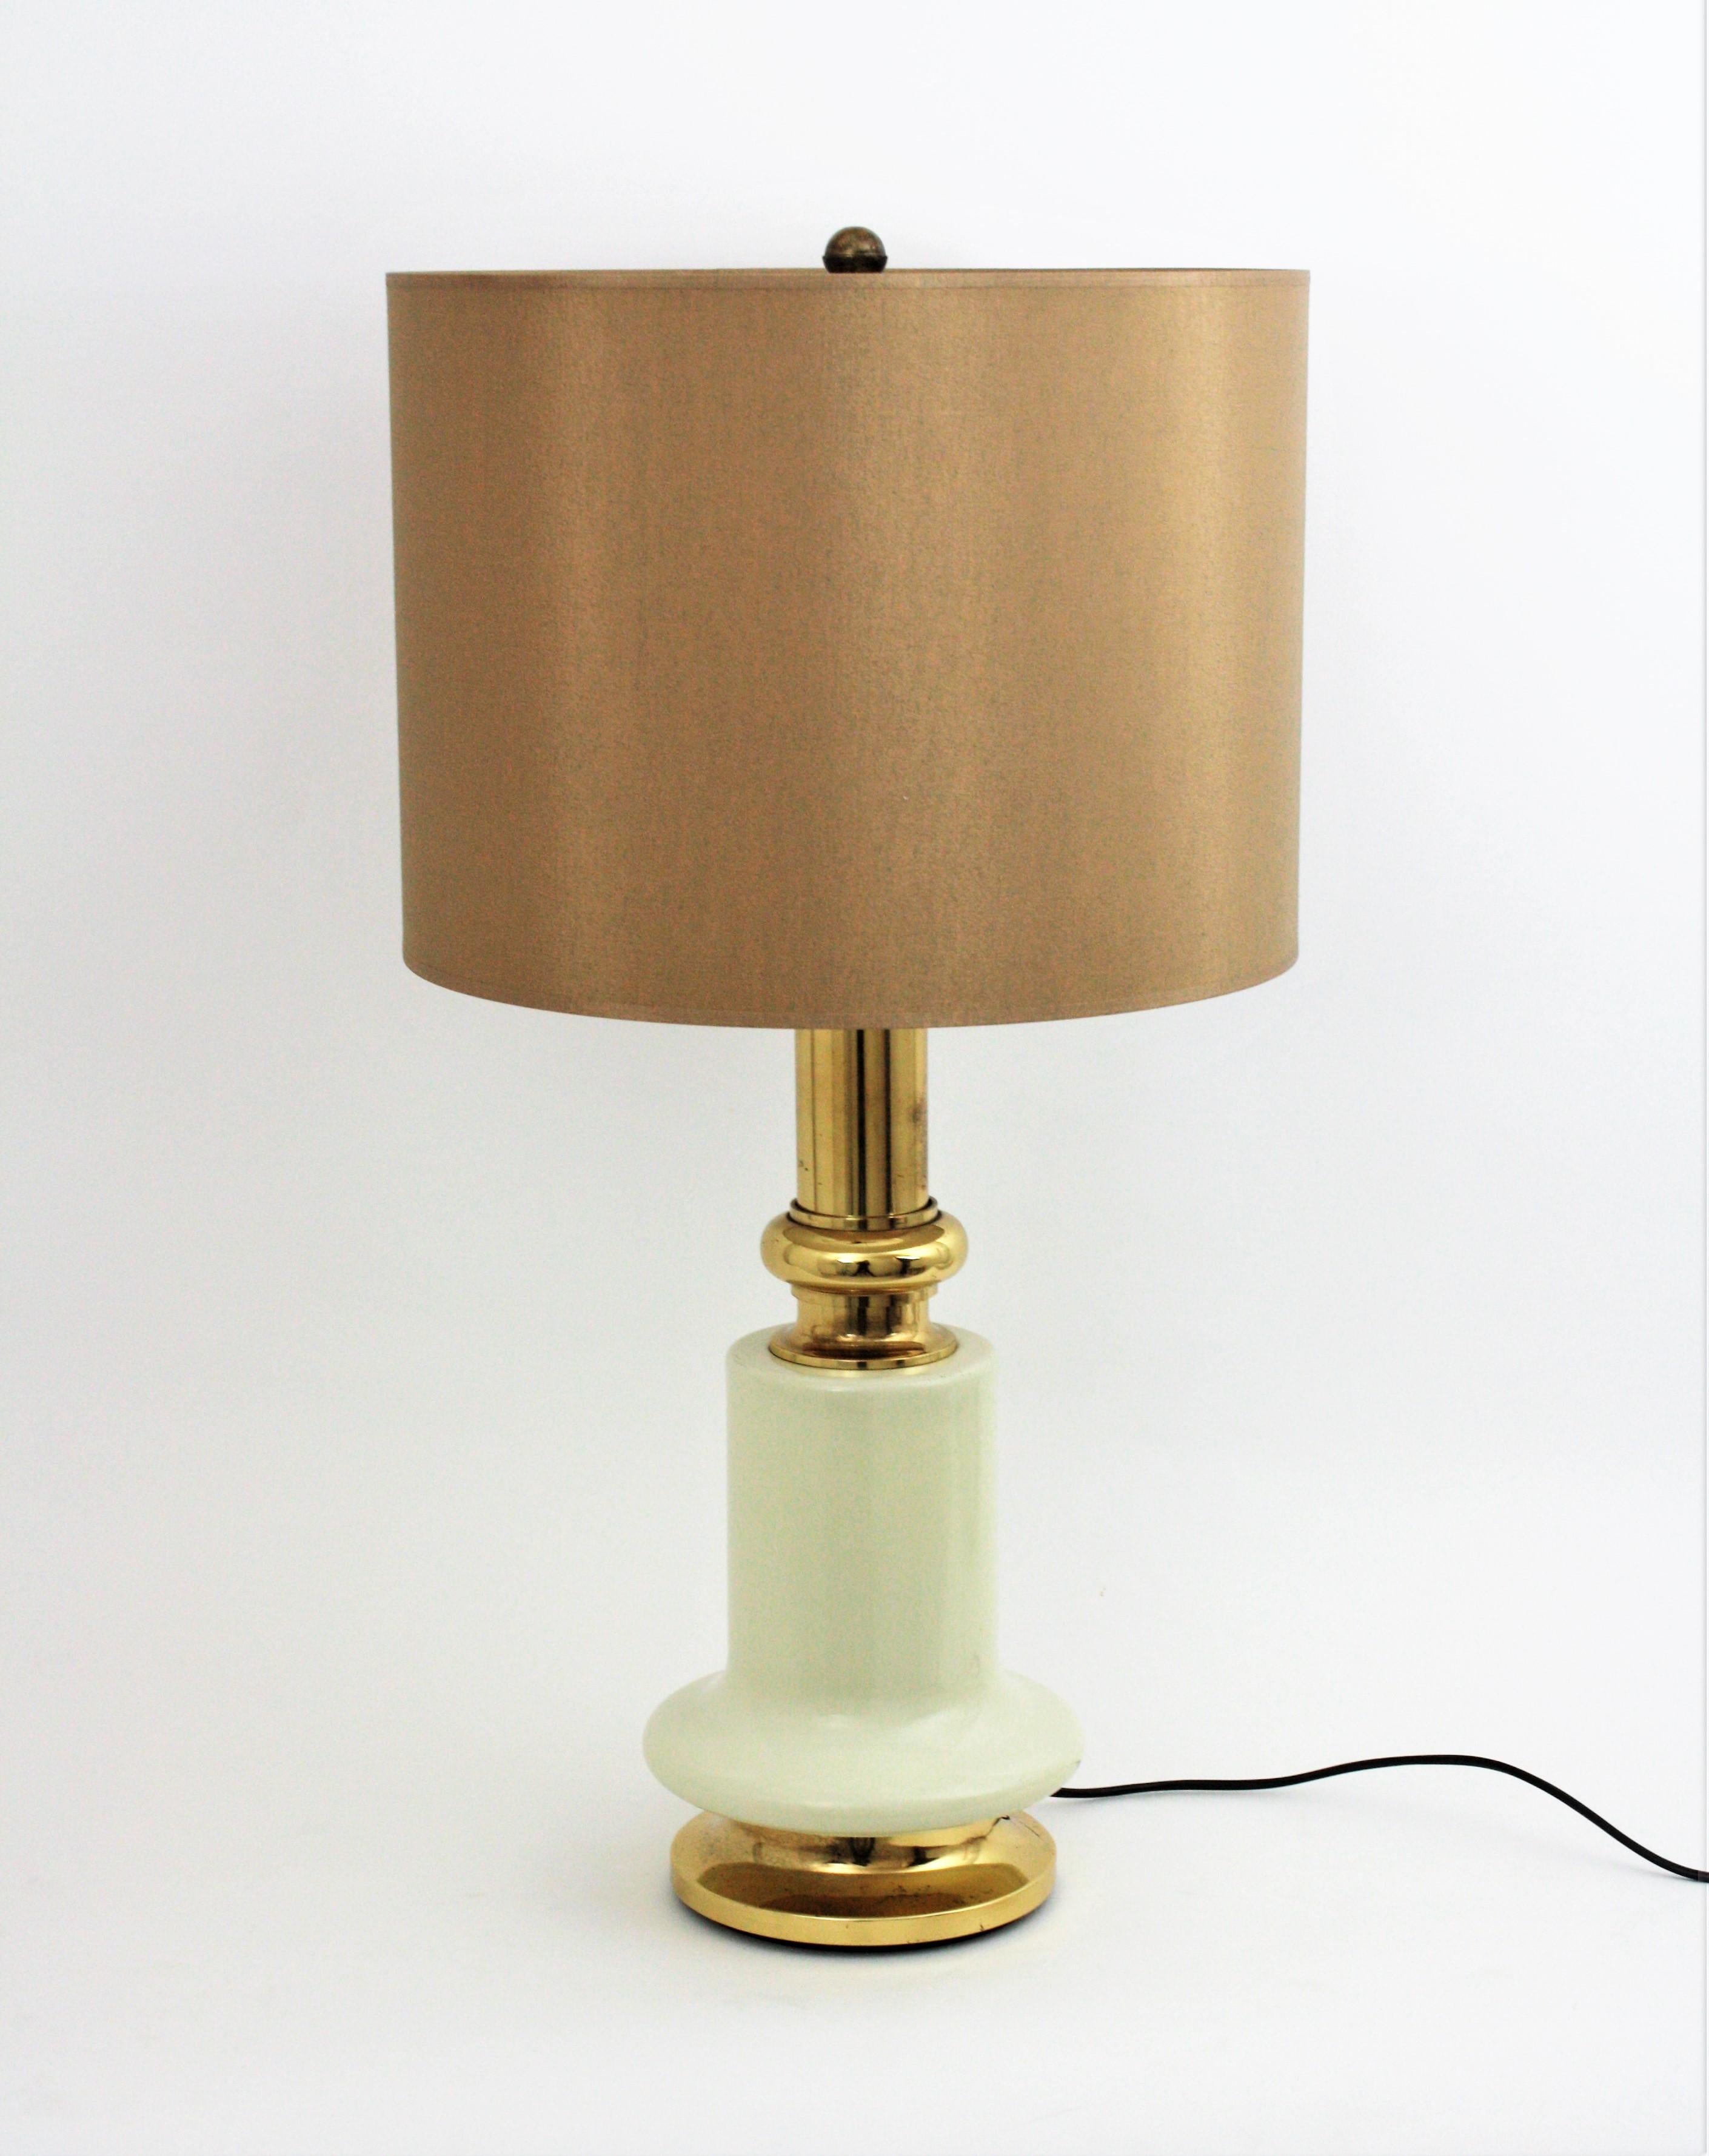 Large Brass and Ivory Lacquer Table Lamp, Spain, 1960s For Sale 1